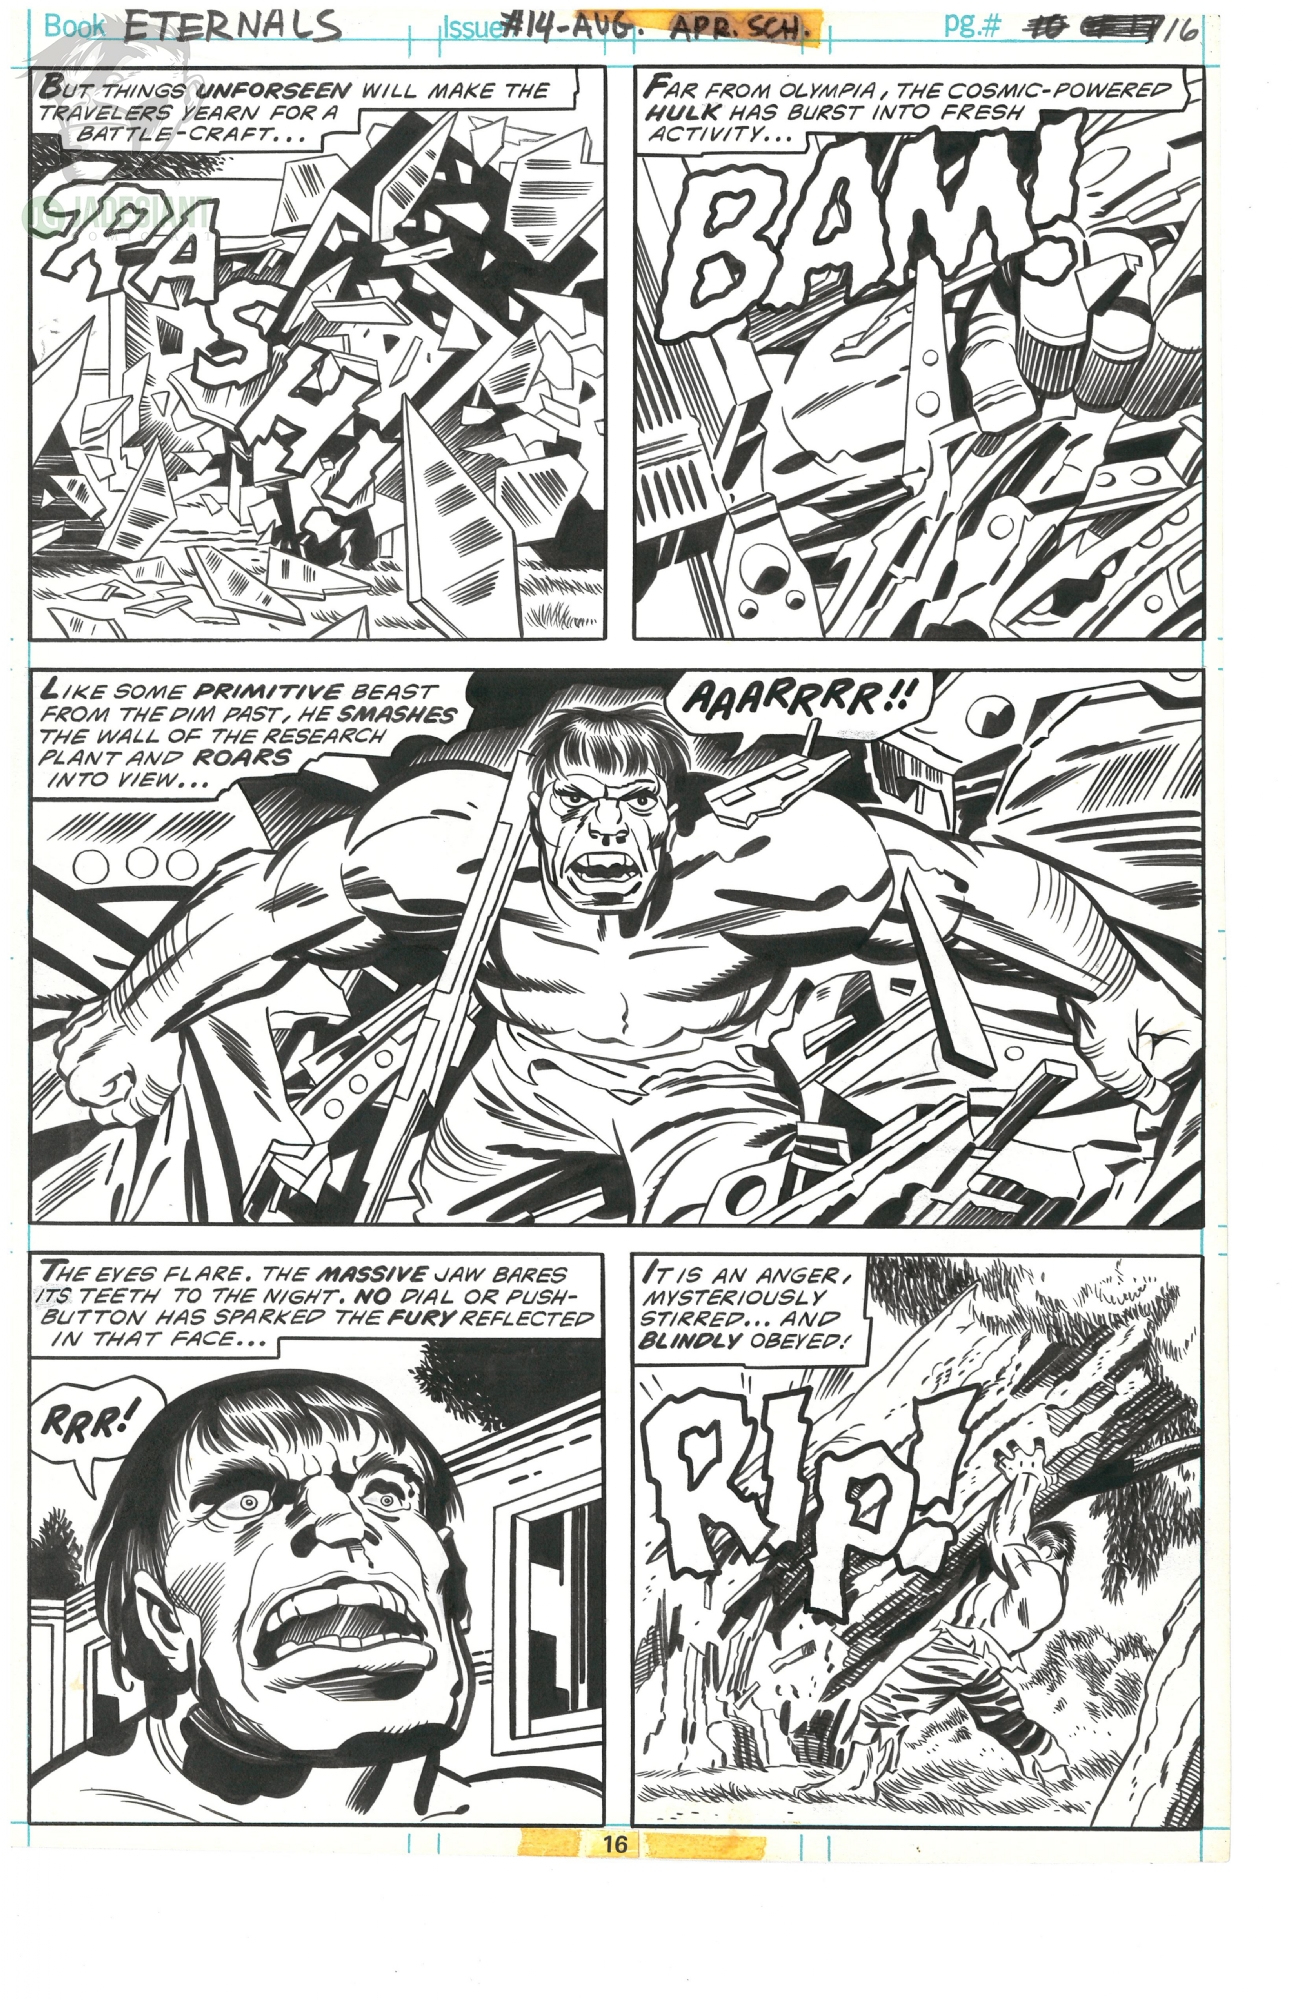 1977 Eternals issue 14 page 16 Cosmic Hulk by Jack Kirby Comic Art